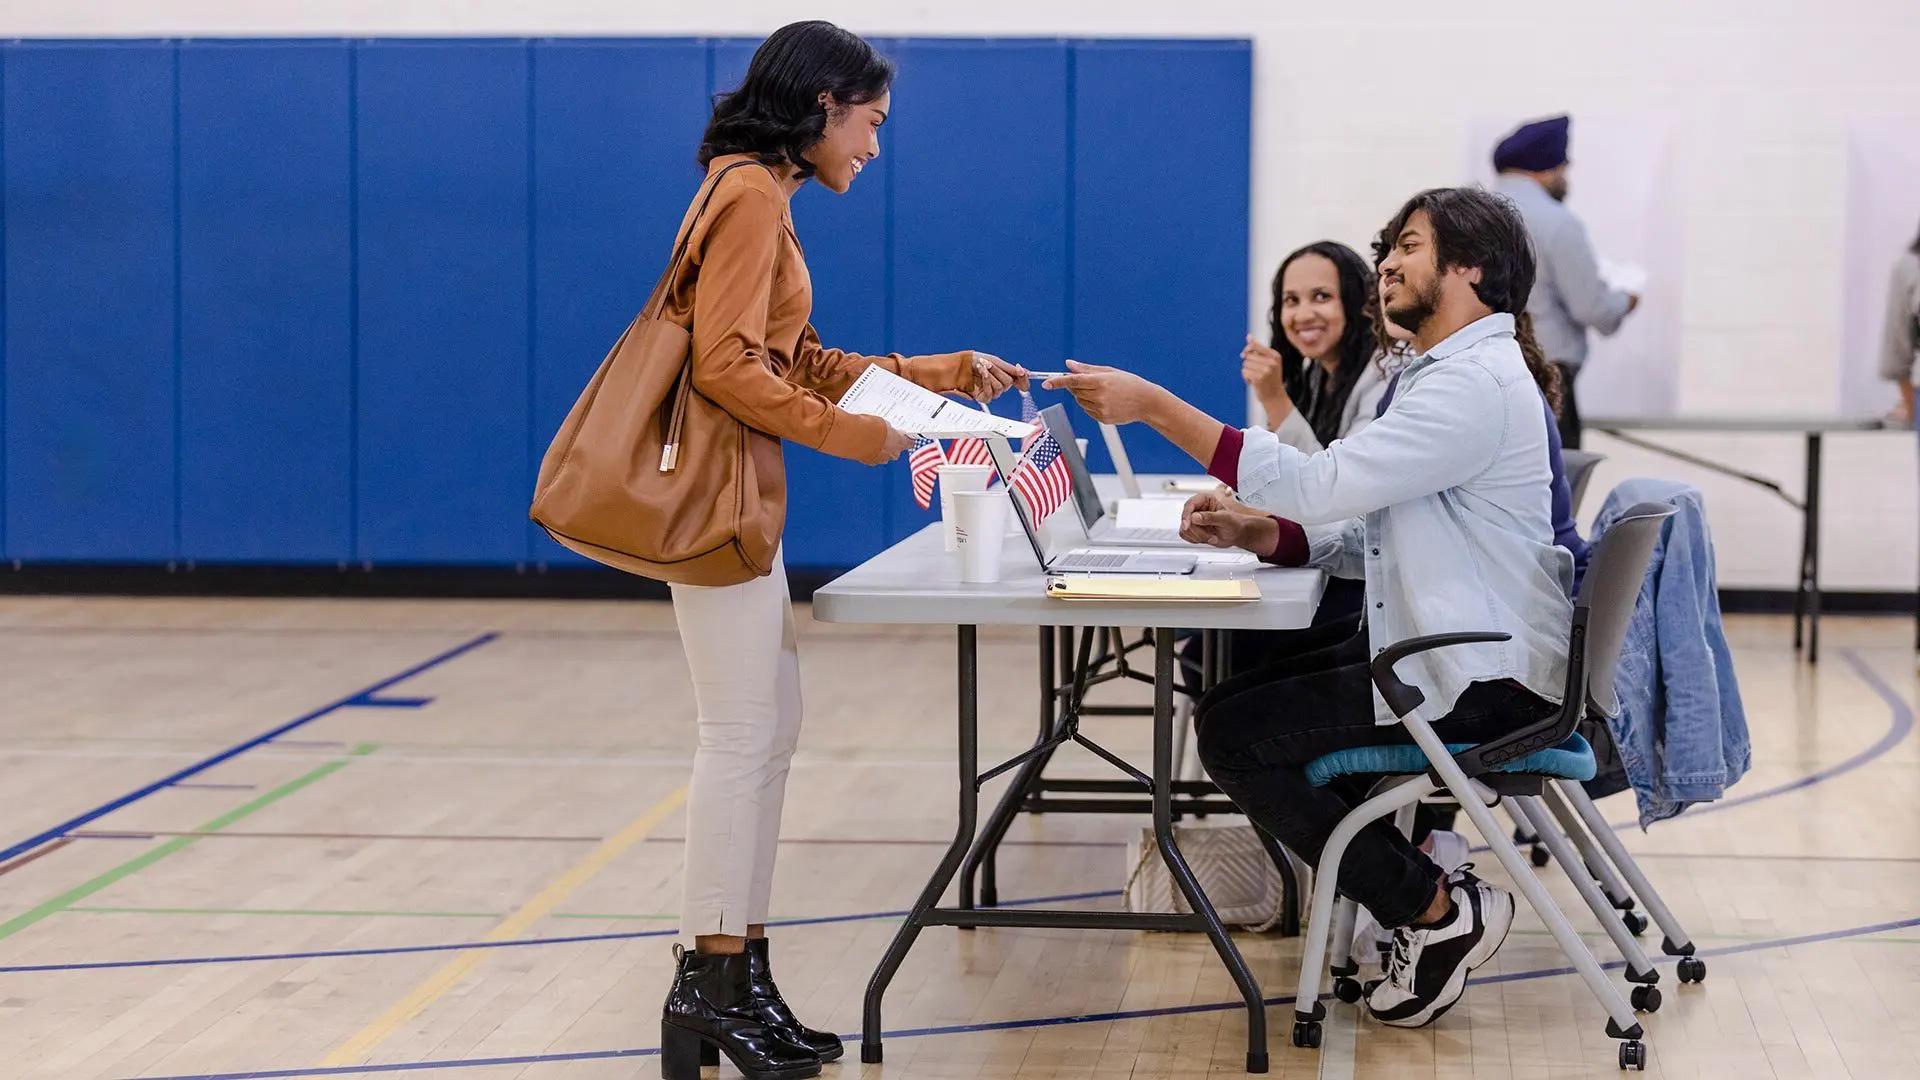 The University System of Maryland is one of 14 applicants to receive student poll worker funding from the federal Help America Vote College Program. UMD will take the lead in developing the training modules, in partnership with the Maryland State Election Commission. Photo by iStock.